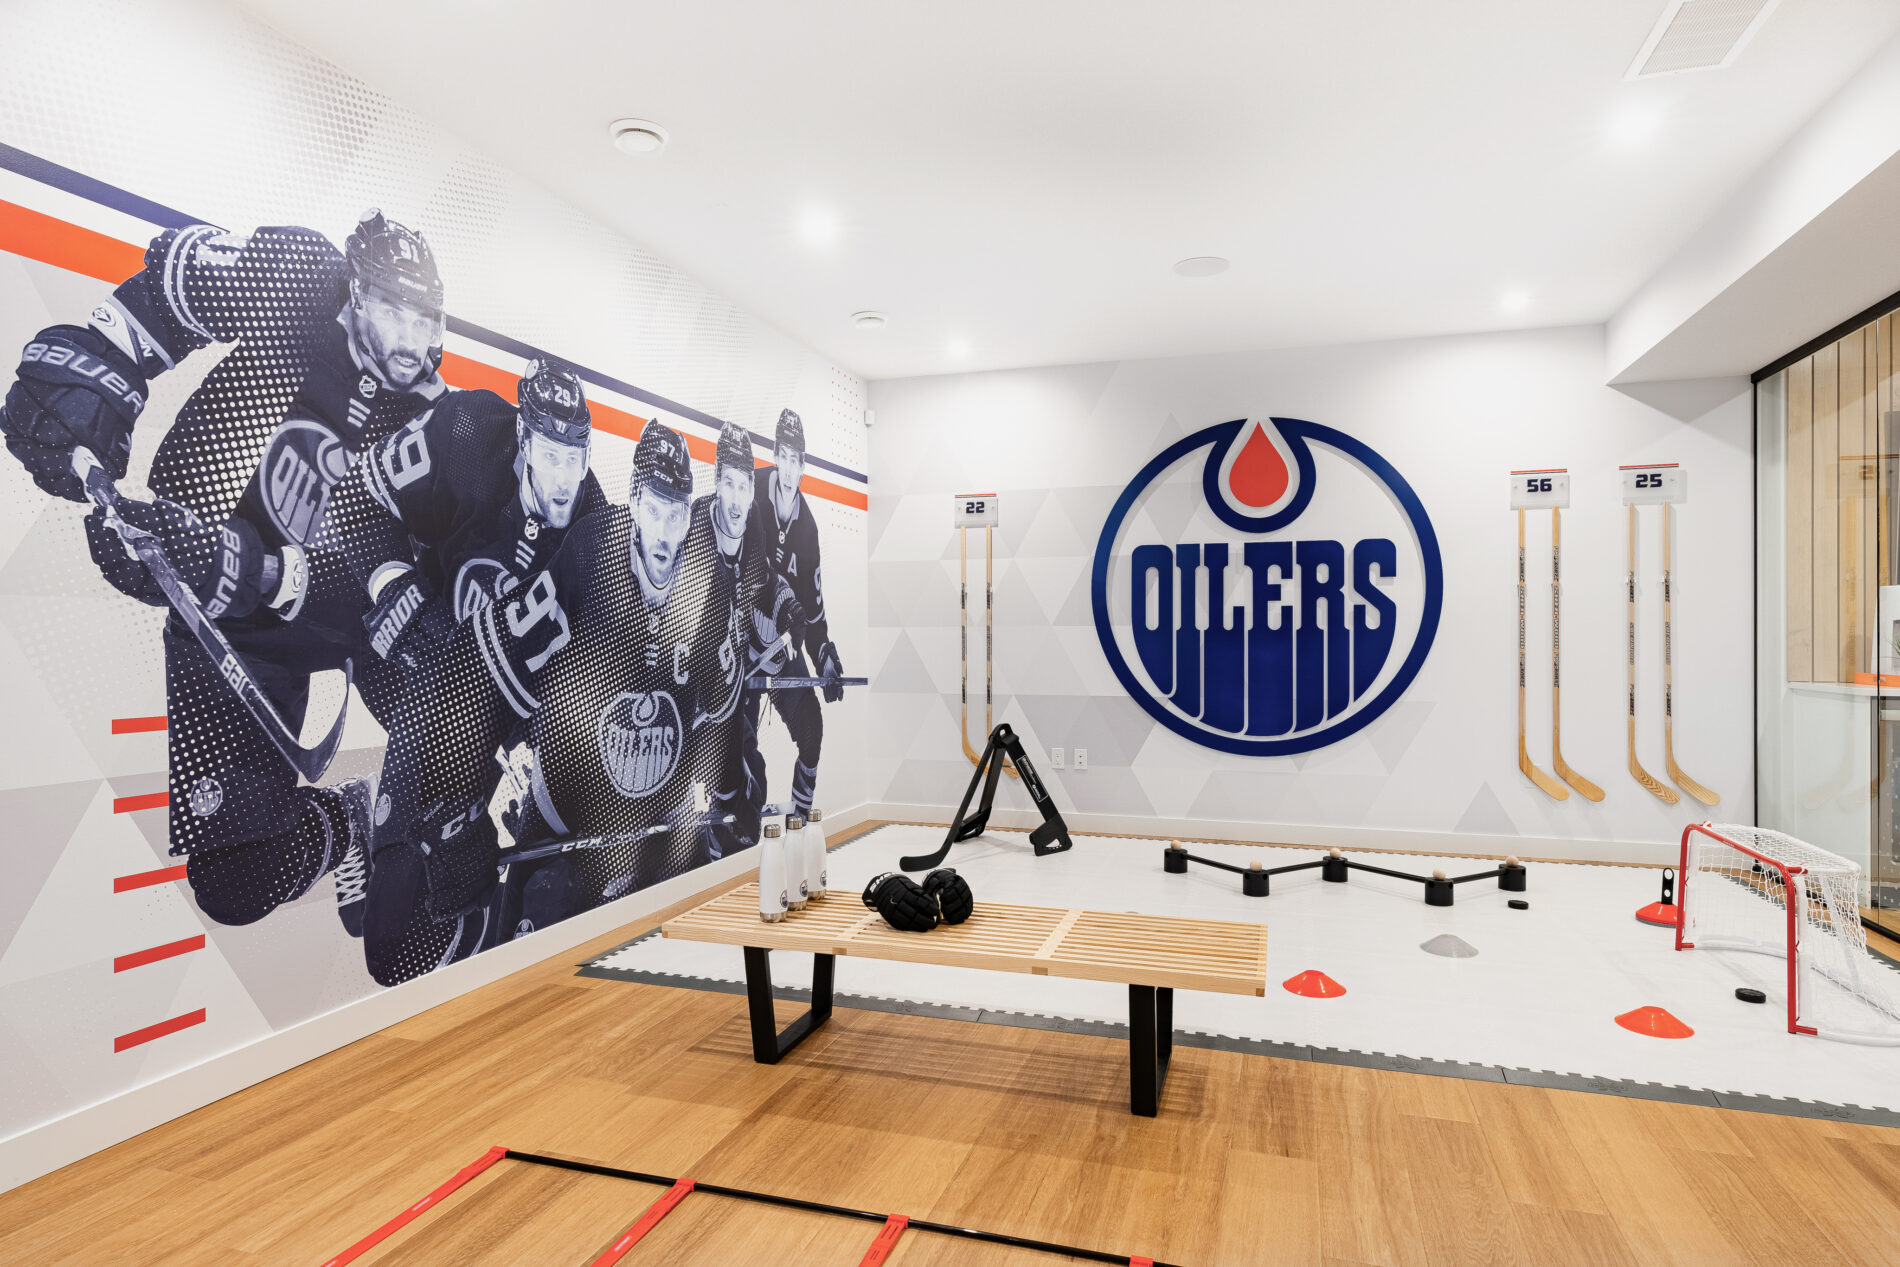 Huge full colour Oilers logo on wall adjacent to a large mural of 5 Edmonton Oilers in Oilers Fan Cave basement